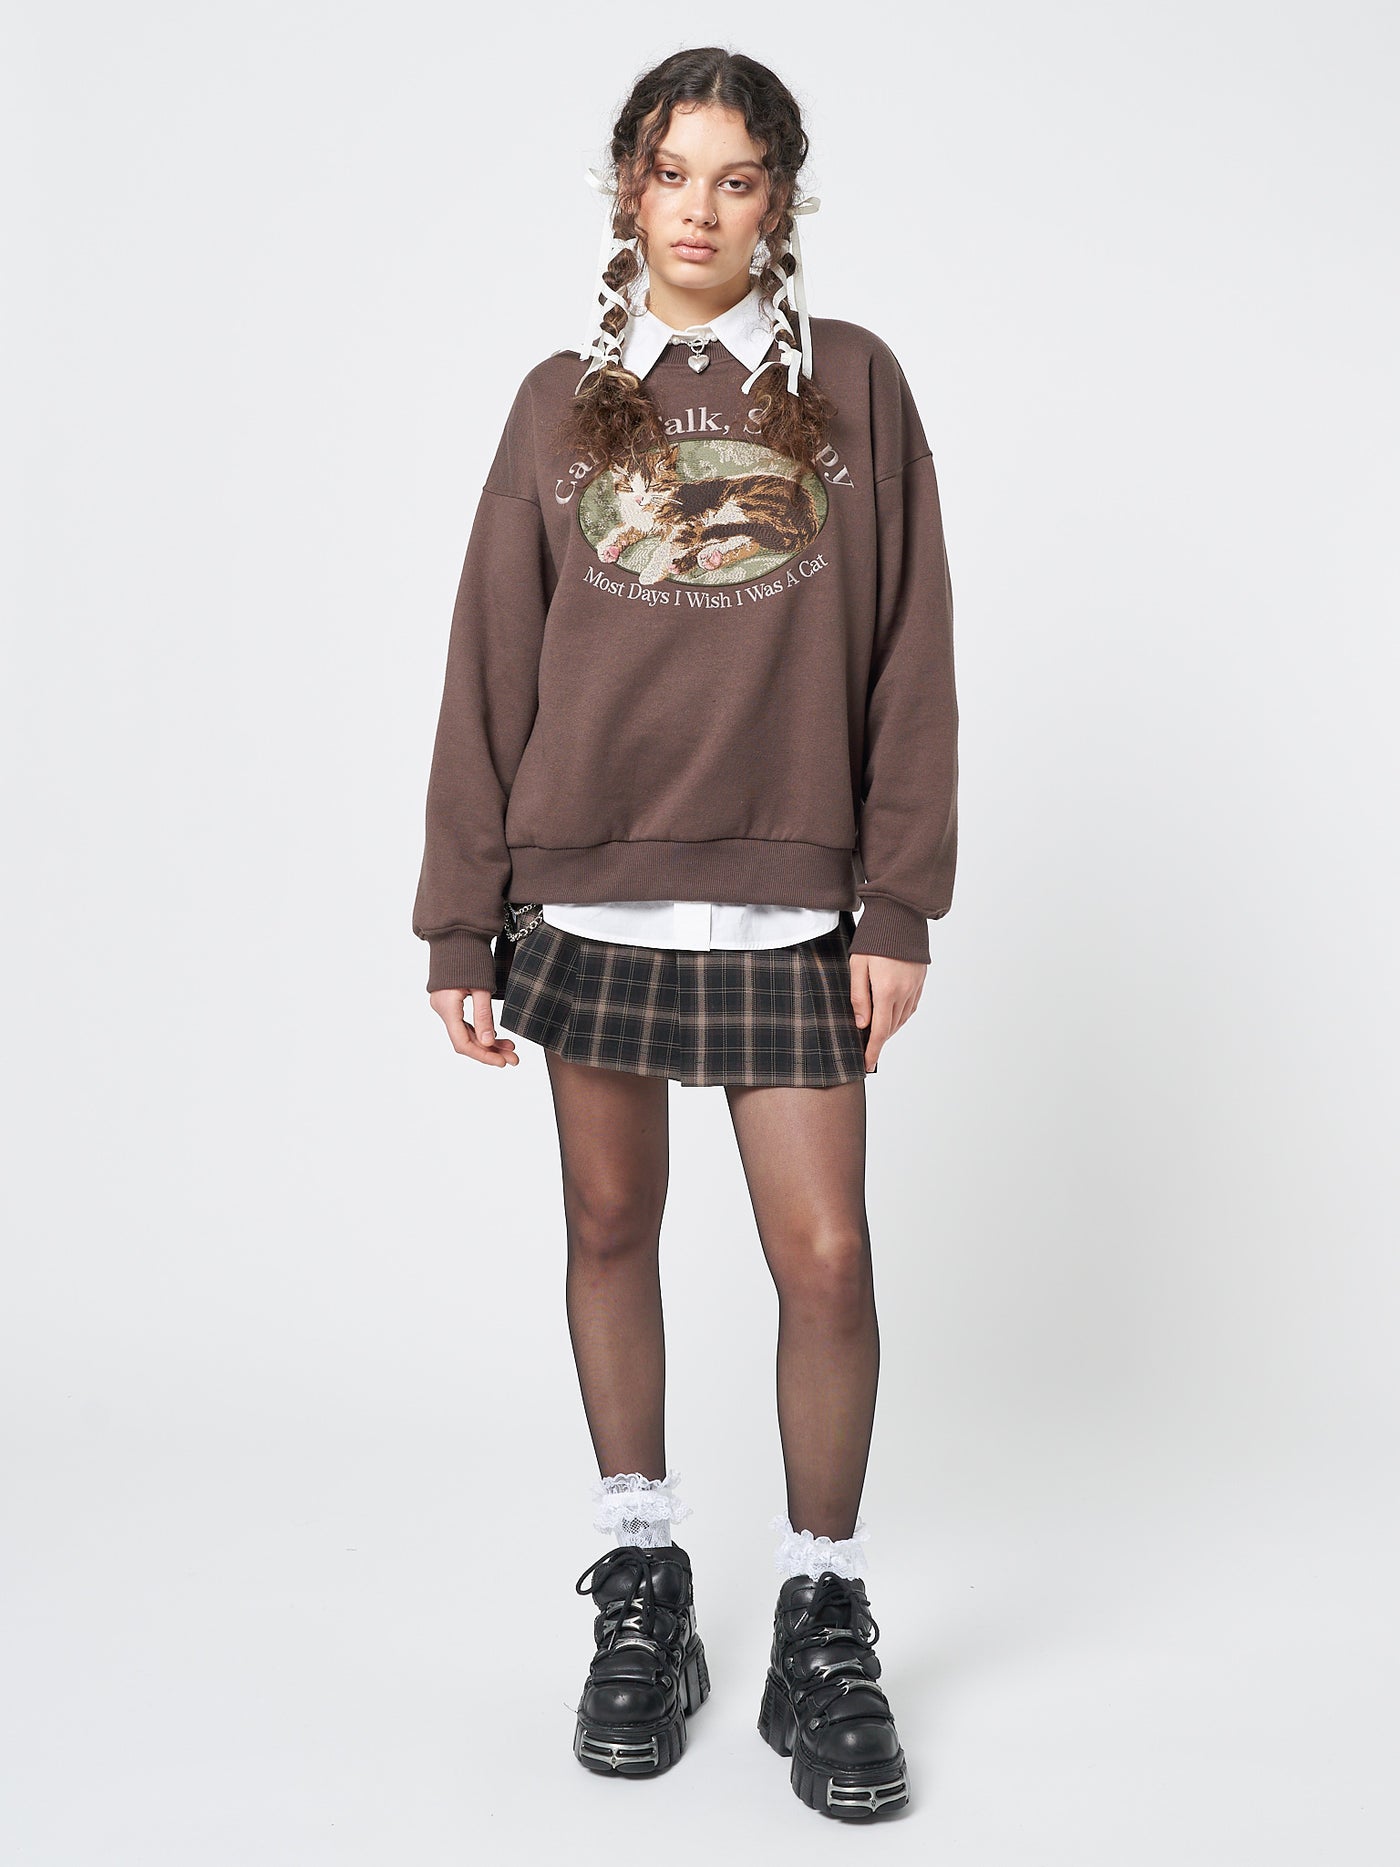 A cozy sweatshirt featuring an adorable "Can't Talk, Sleepy" cat embroidery, perfect for cat enthusiasts.